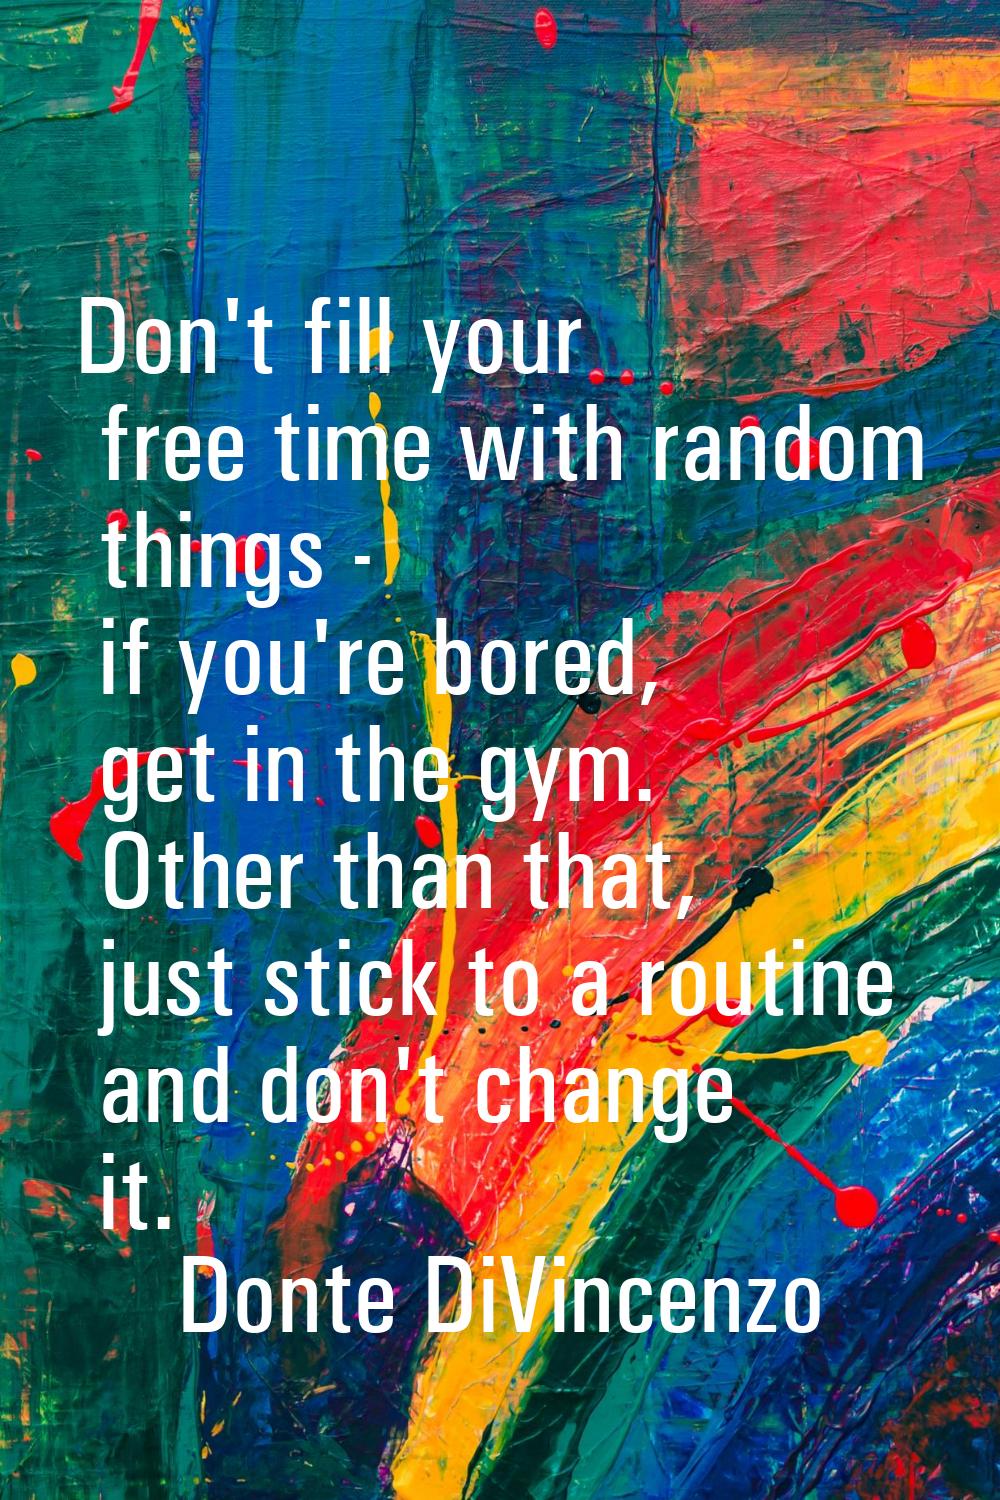 Don't fill your free time with random things - if you're bored, get in the gym. Other than that, ju